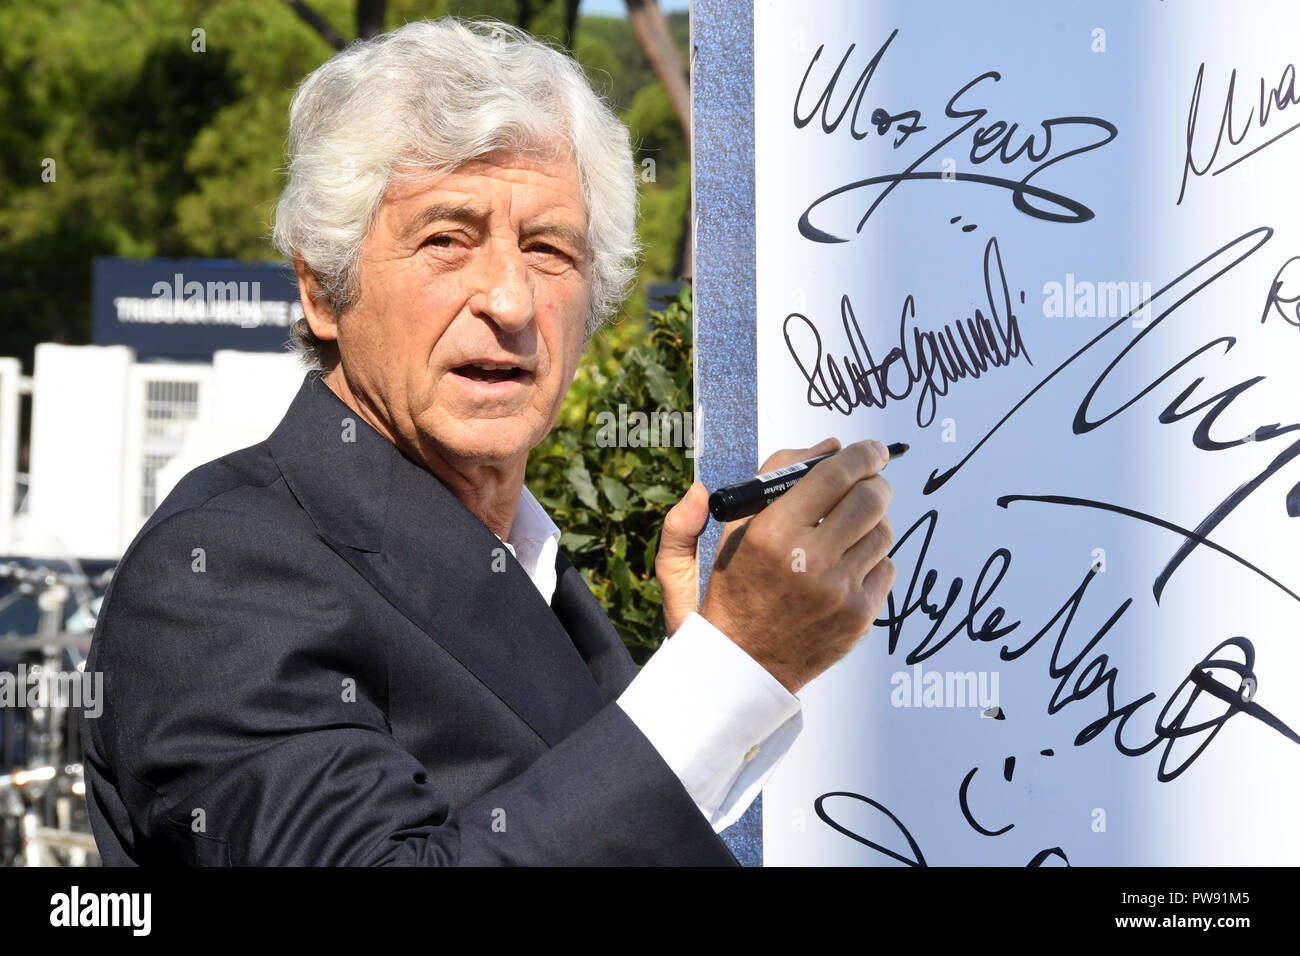 Rome Italy 13 October 2018 - Foro Italico - Tennis and Friends Gianni Rivera Credit: Giuseppe Andidero/Alamy Live News Stock Photo